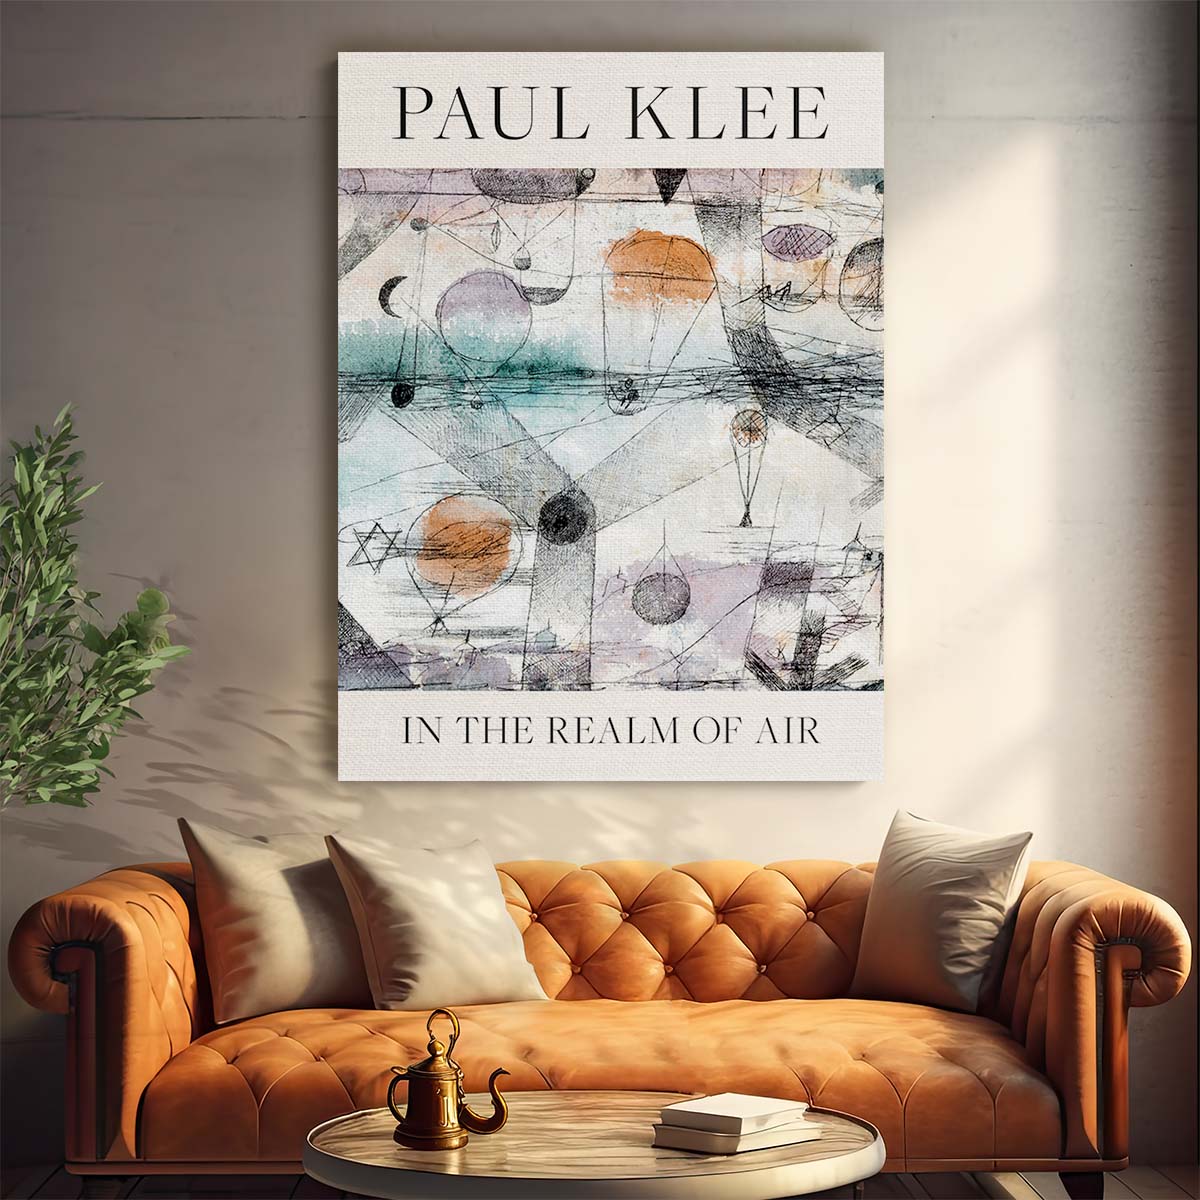 1917 Paul Klee Watercolor Illustration, 'In the Realm of Air' Poster by Luxuriance Designs, made in USA